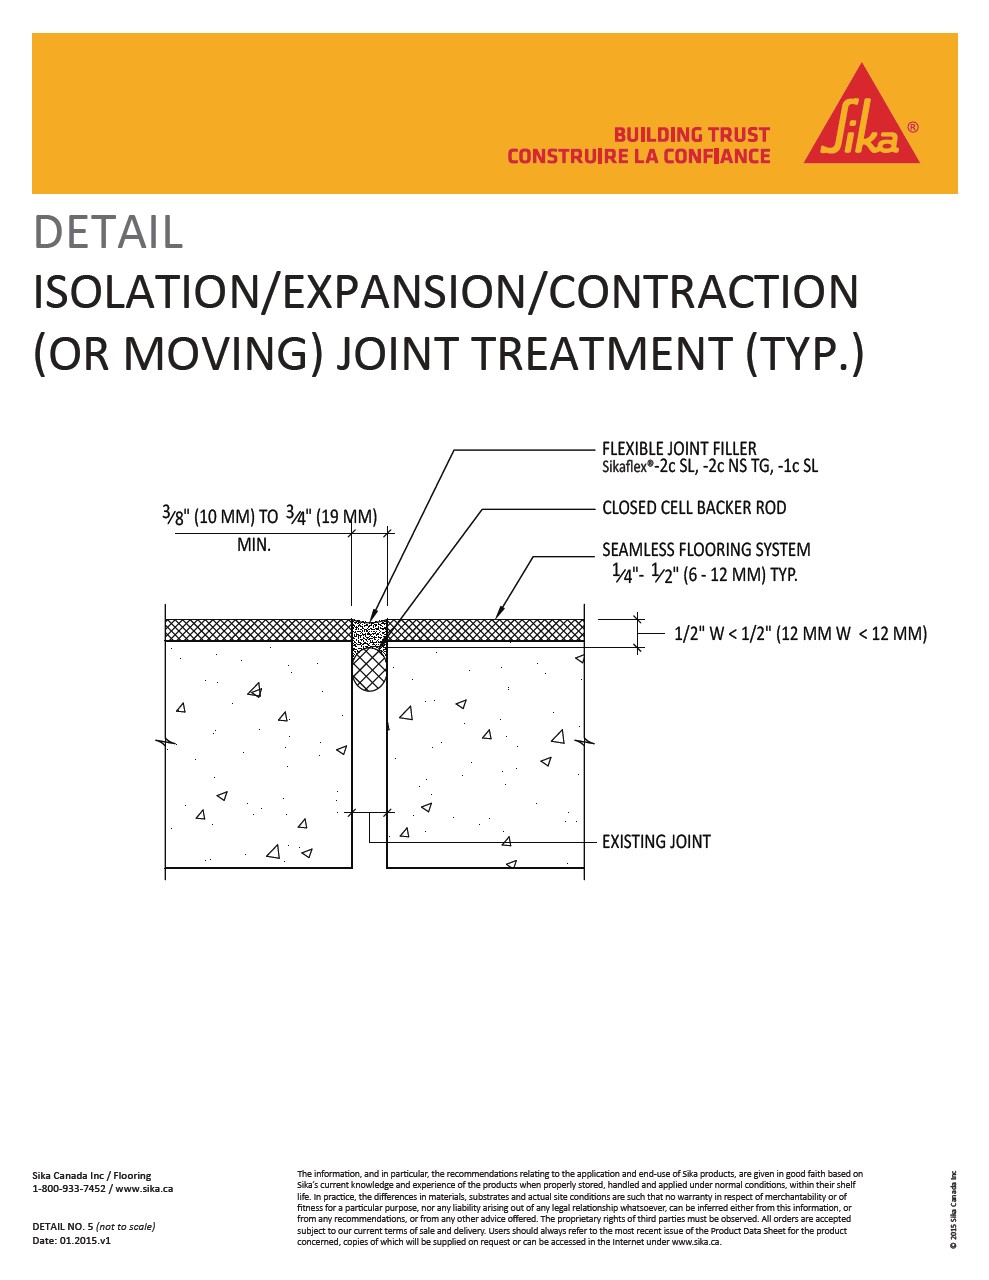 5-Isolation-Expansion-Contraction Joint Treatment 